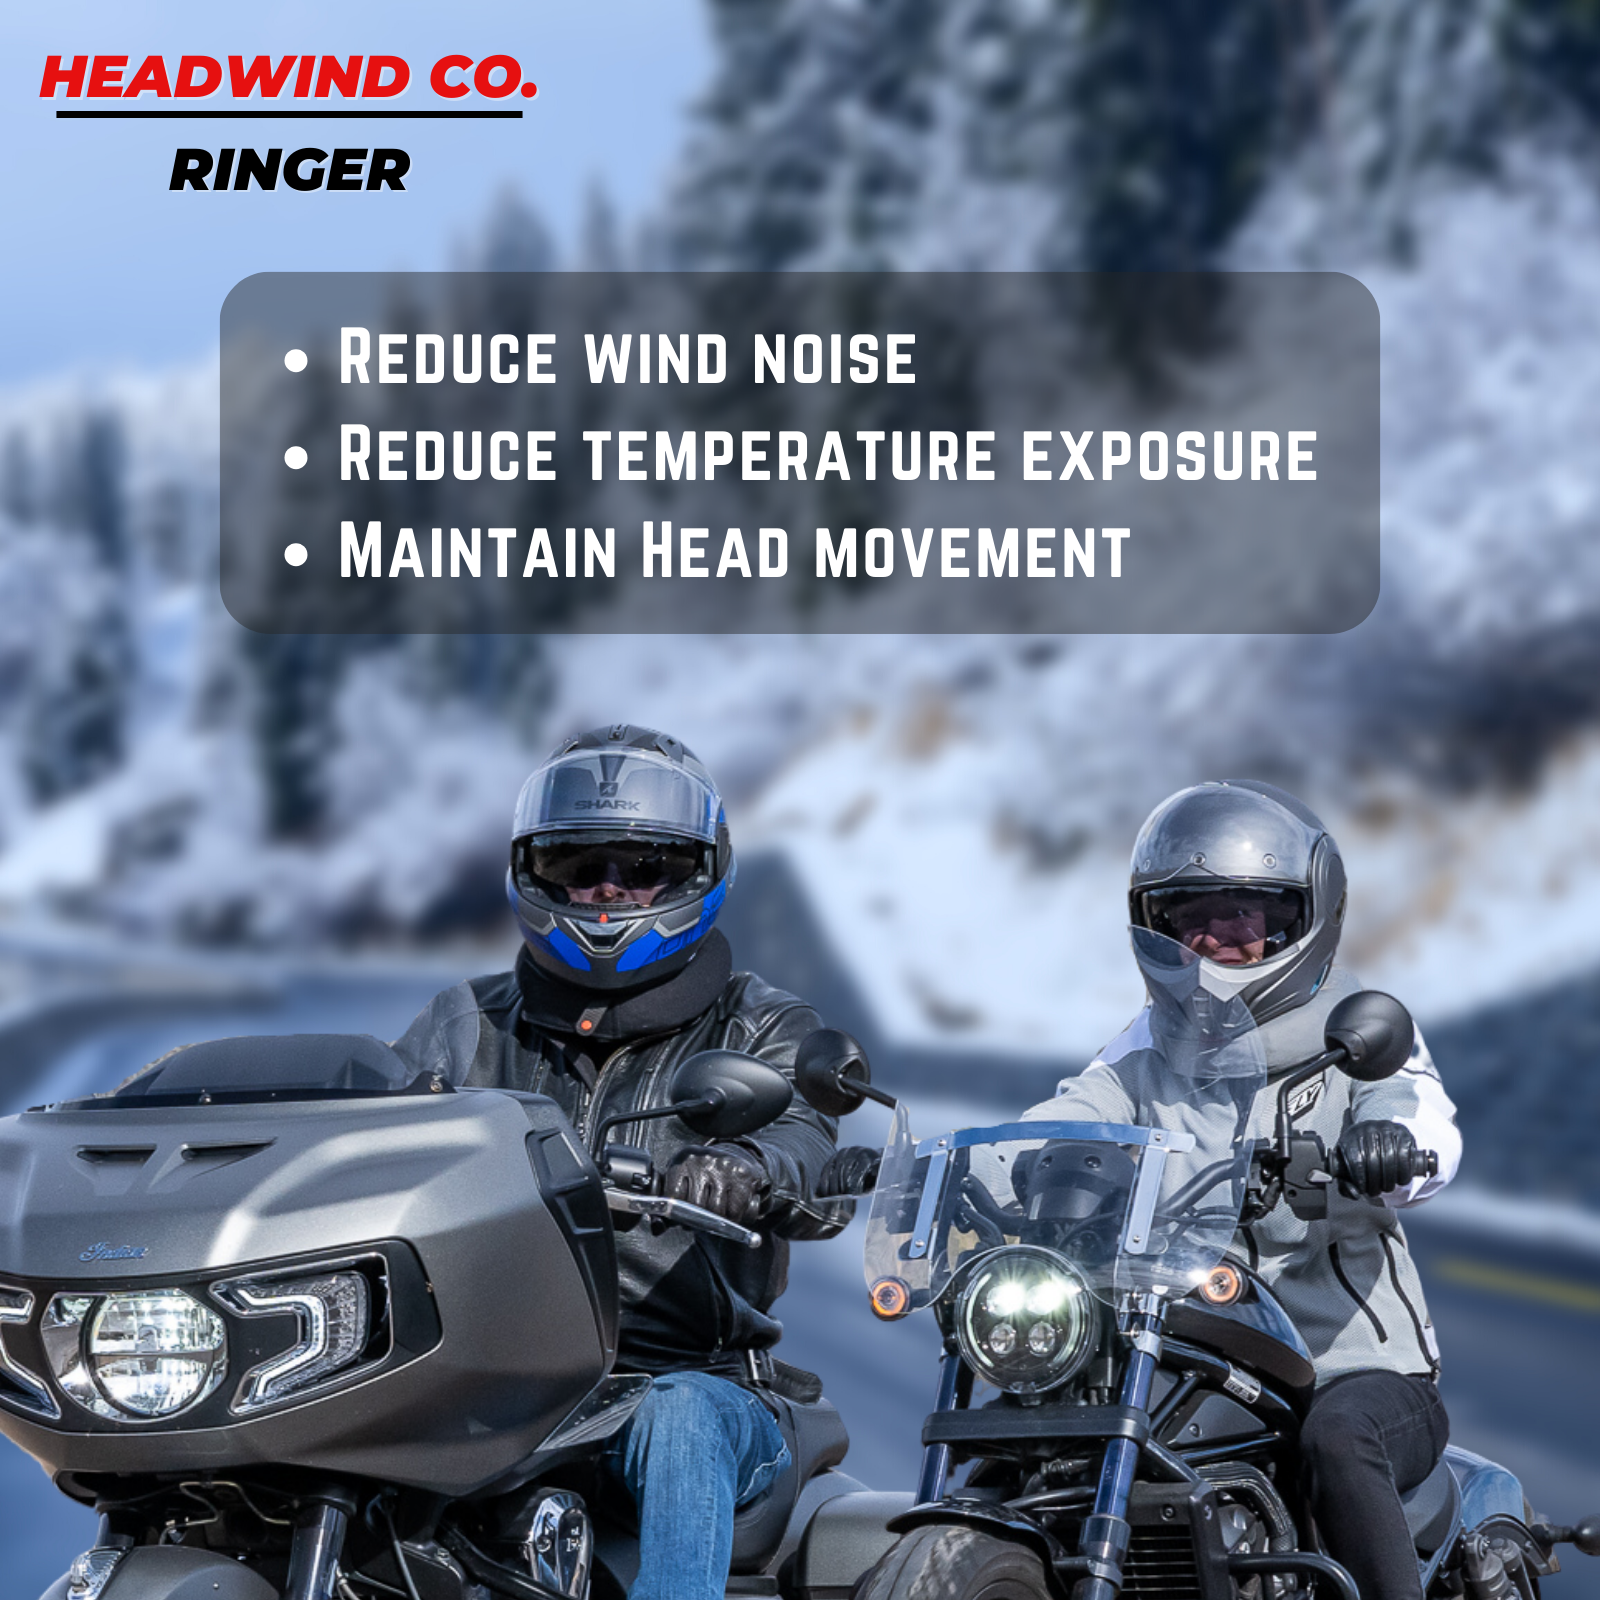 Headwind Ringer helps reduce wind noise, temperature exposure, and maintain head movement